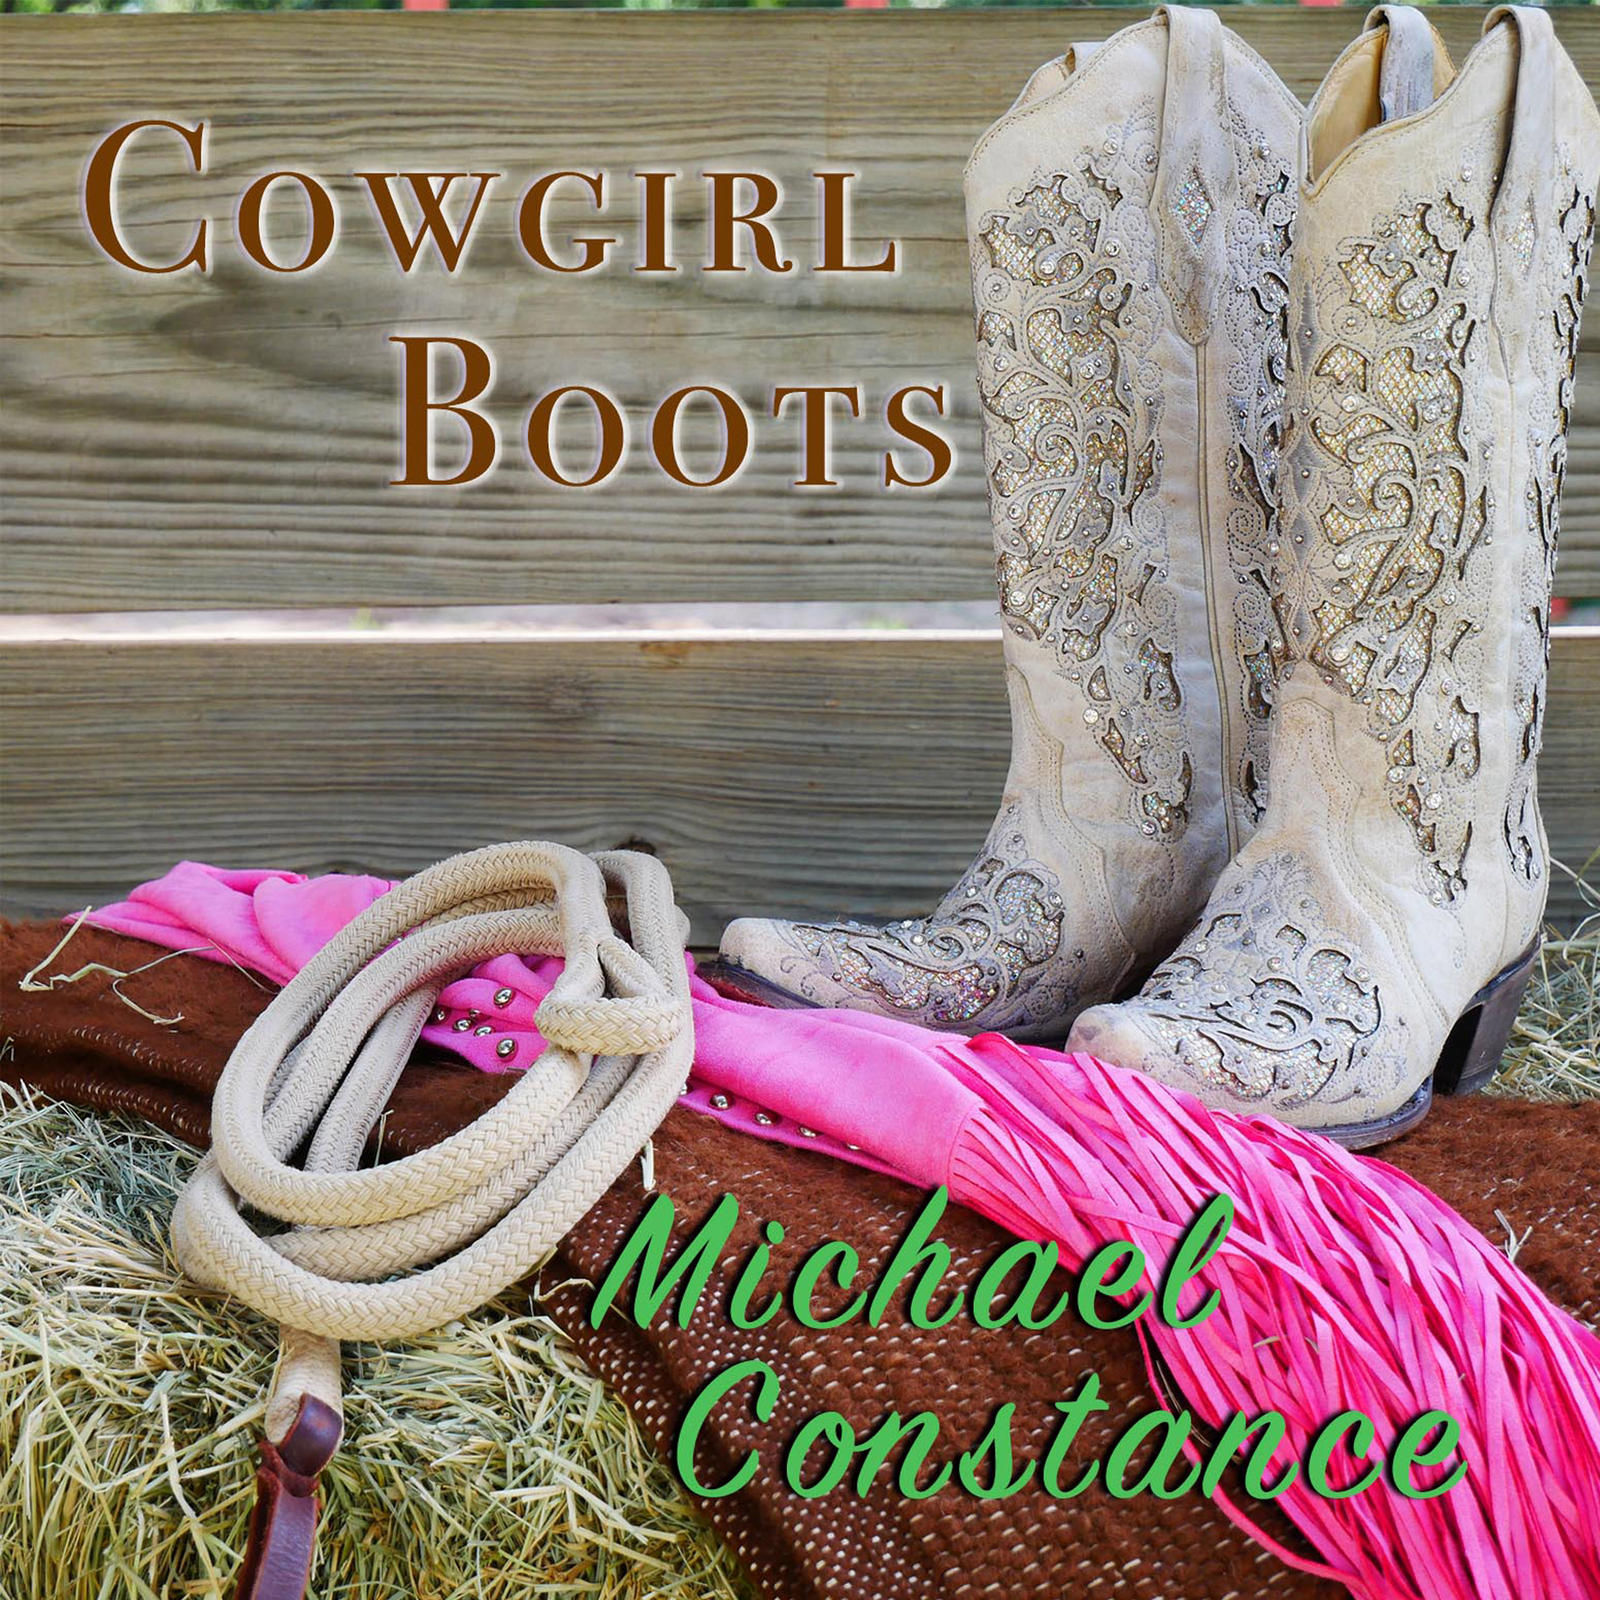 CD Album Cowgirl Boots